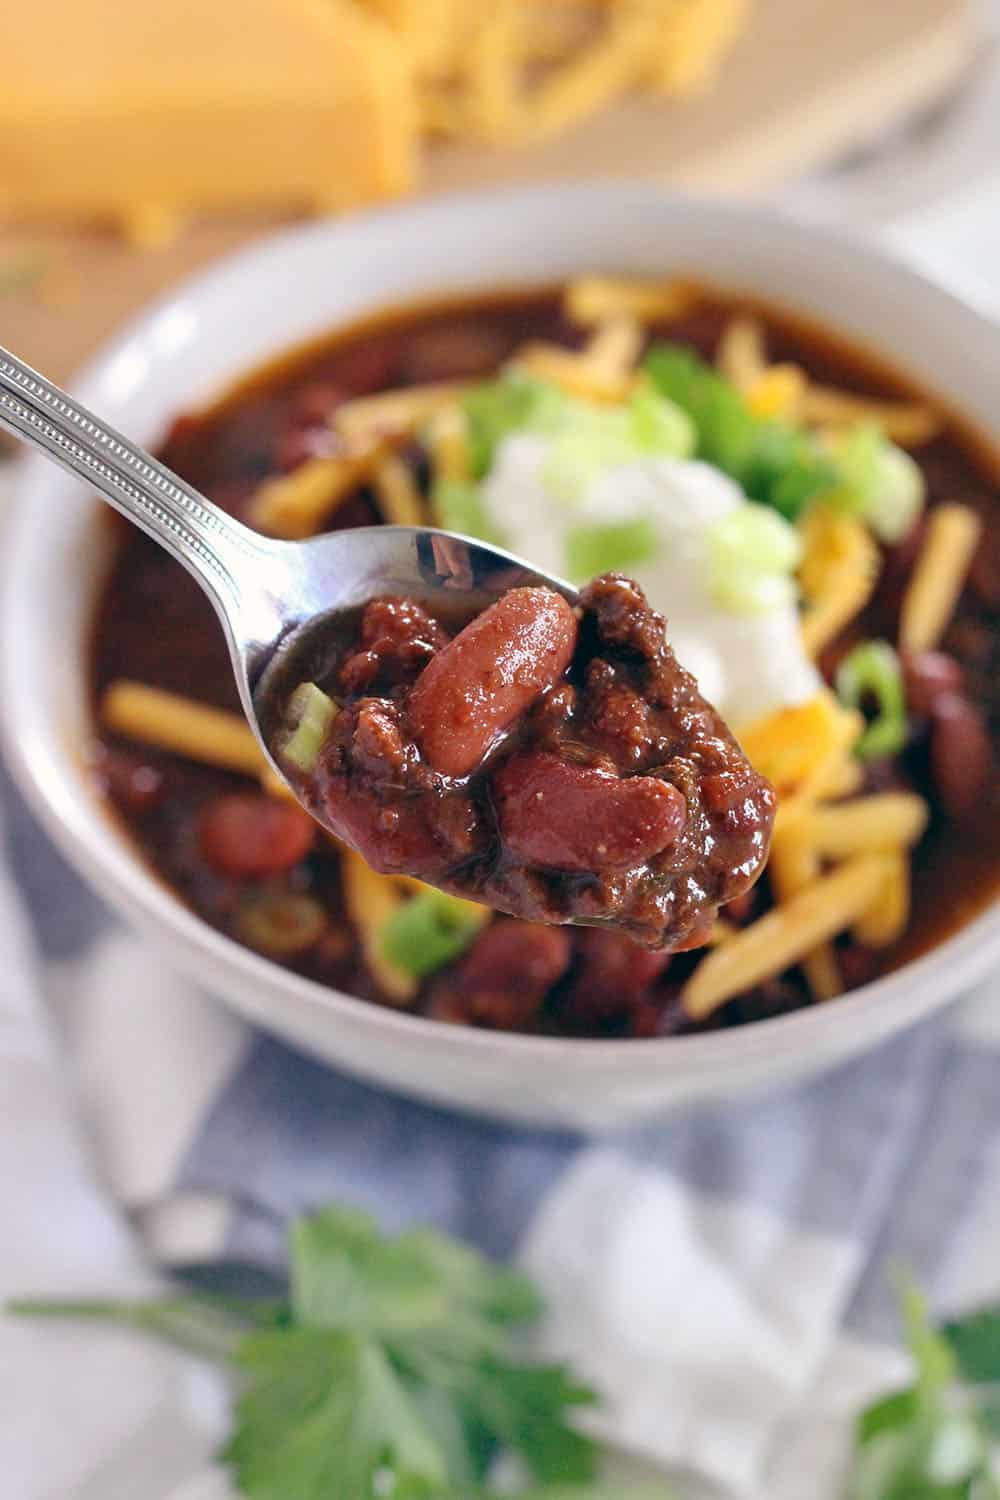 This Instant Pot Chili is made with ground beef and dry kidney beans, and comes together in less than an hour! It's cheap, healthy, and DELICIOUS.